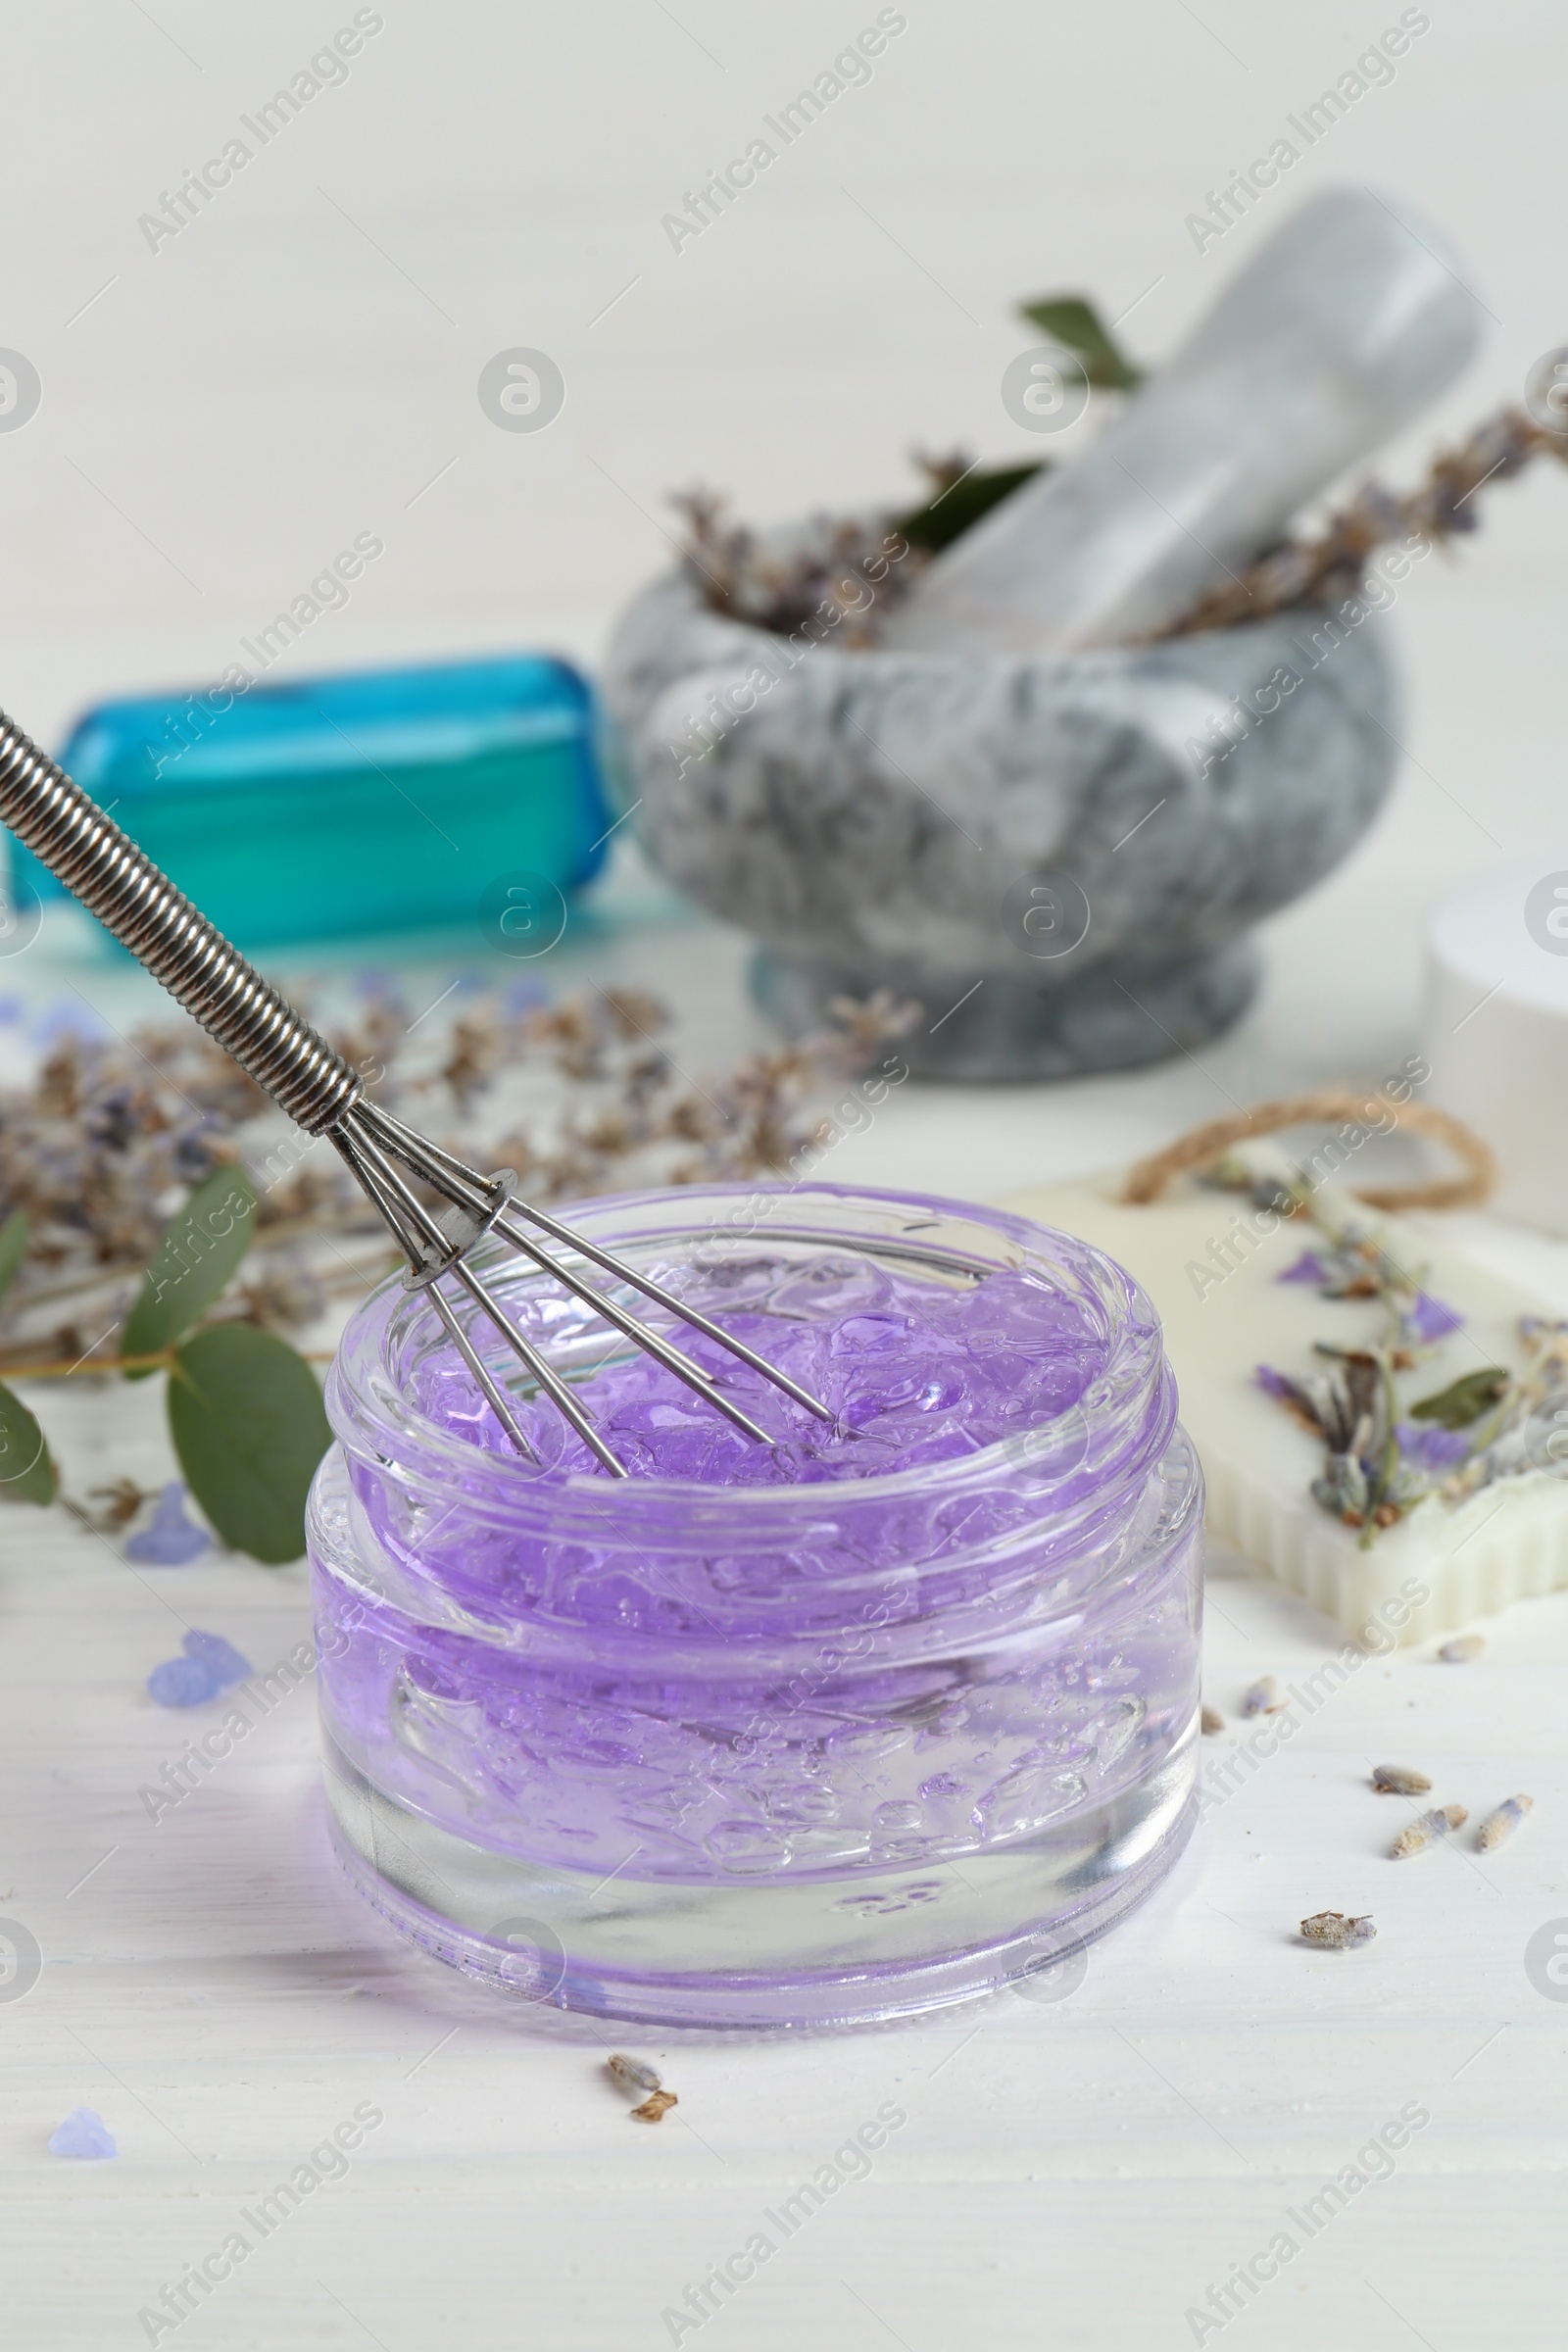 Photo of Homemade lavender gel and whisk on white wooden table